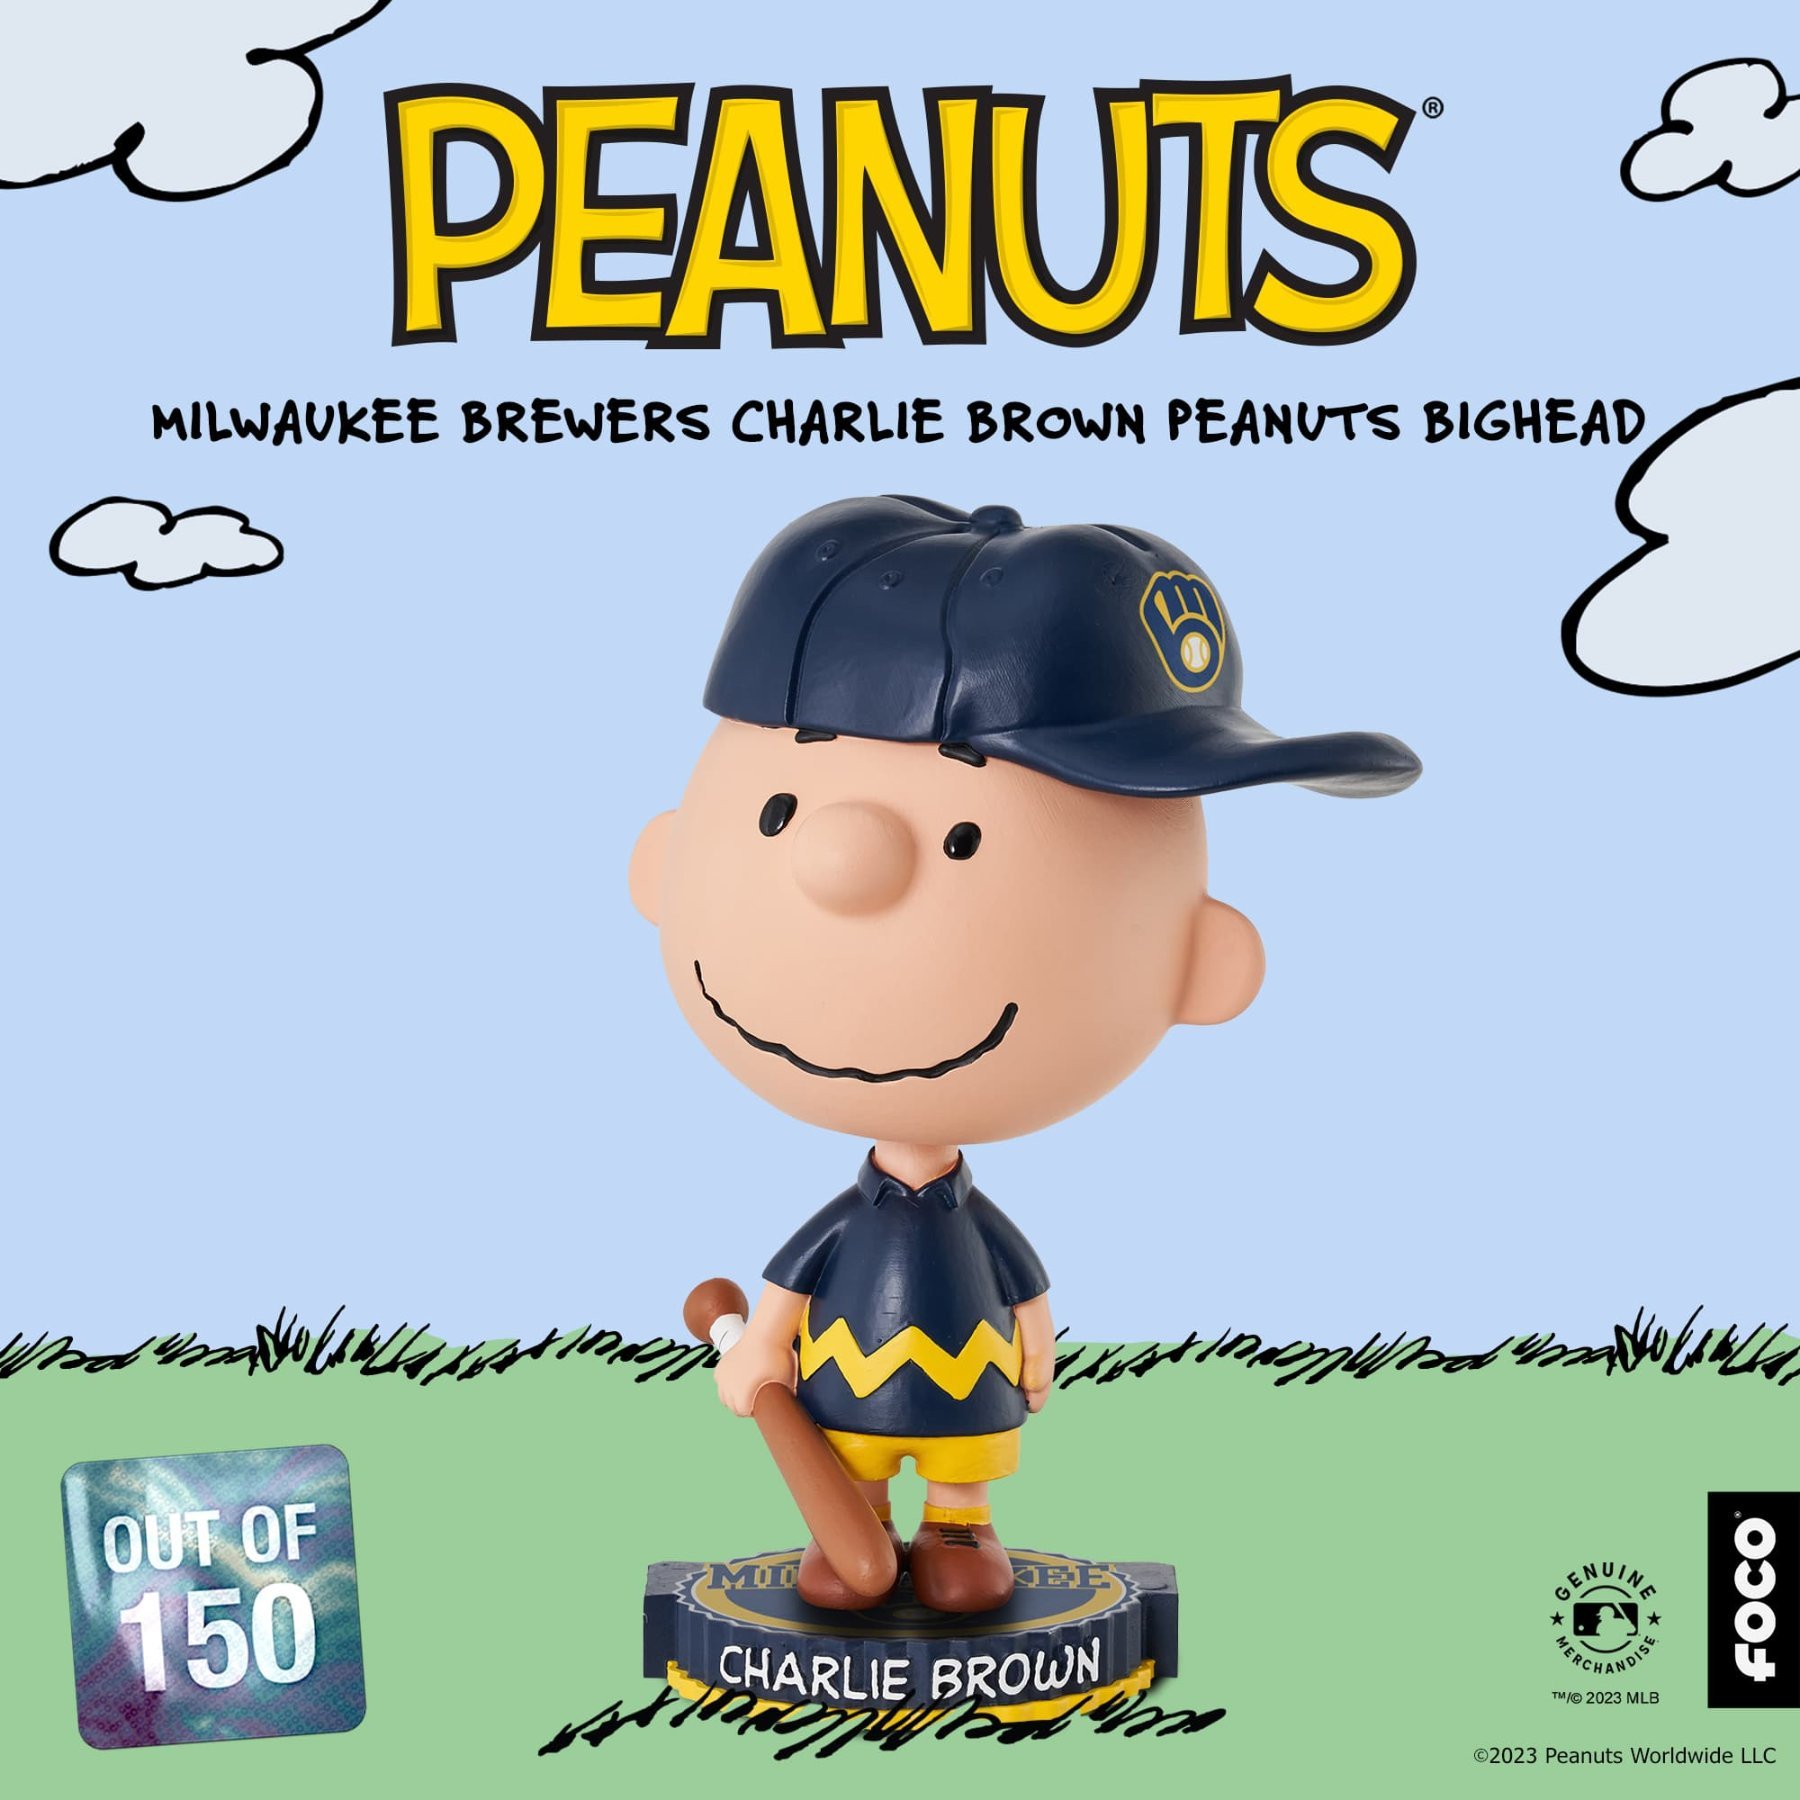 New bobbleheads released to celebrate the Brewers' home opener, Baseball